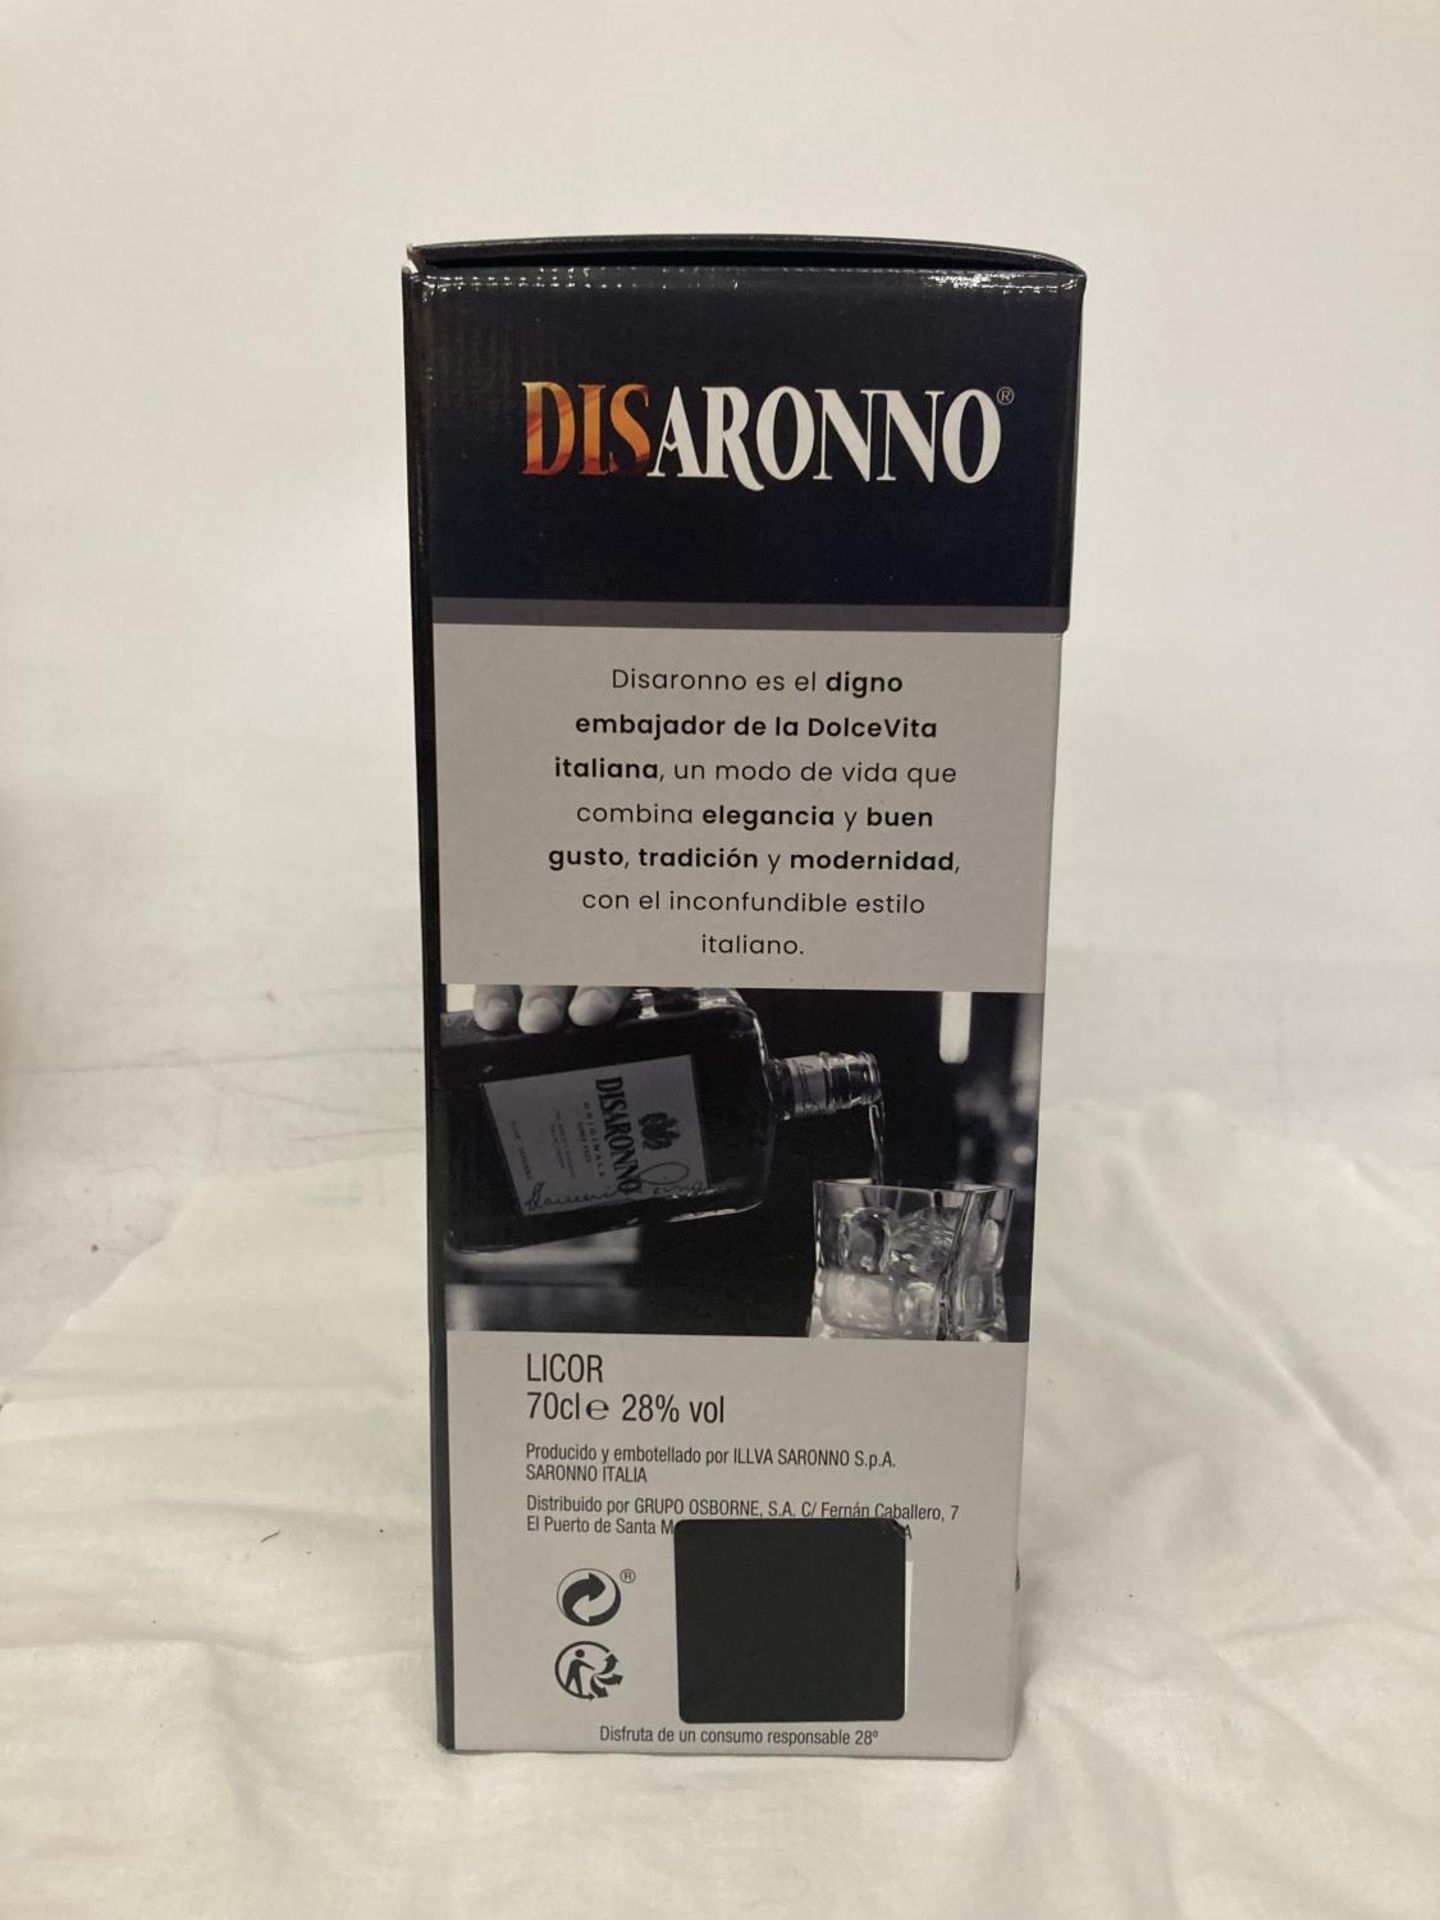 A BOXED DISARONNO GIFT SET WITH 700ML BOTTLE OF DISARONNO AND A BRANDED GLASS - Image 2 of 3